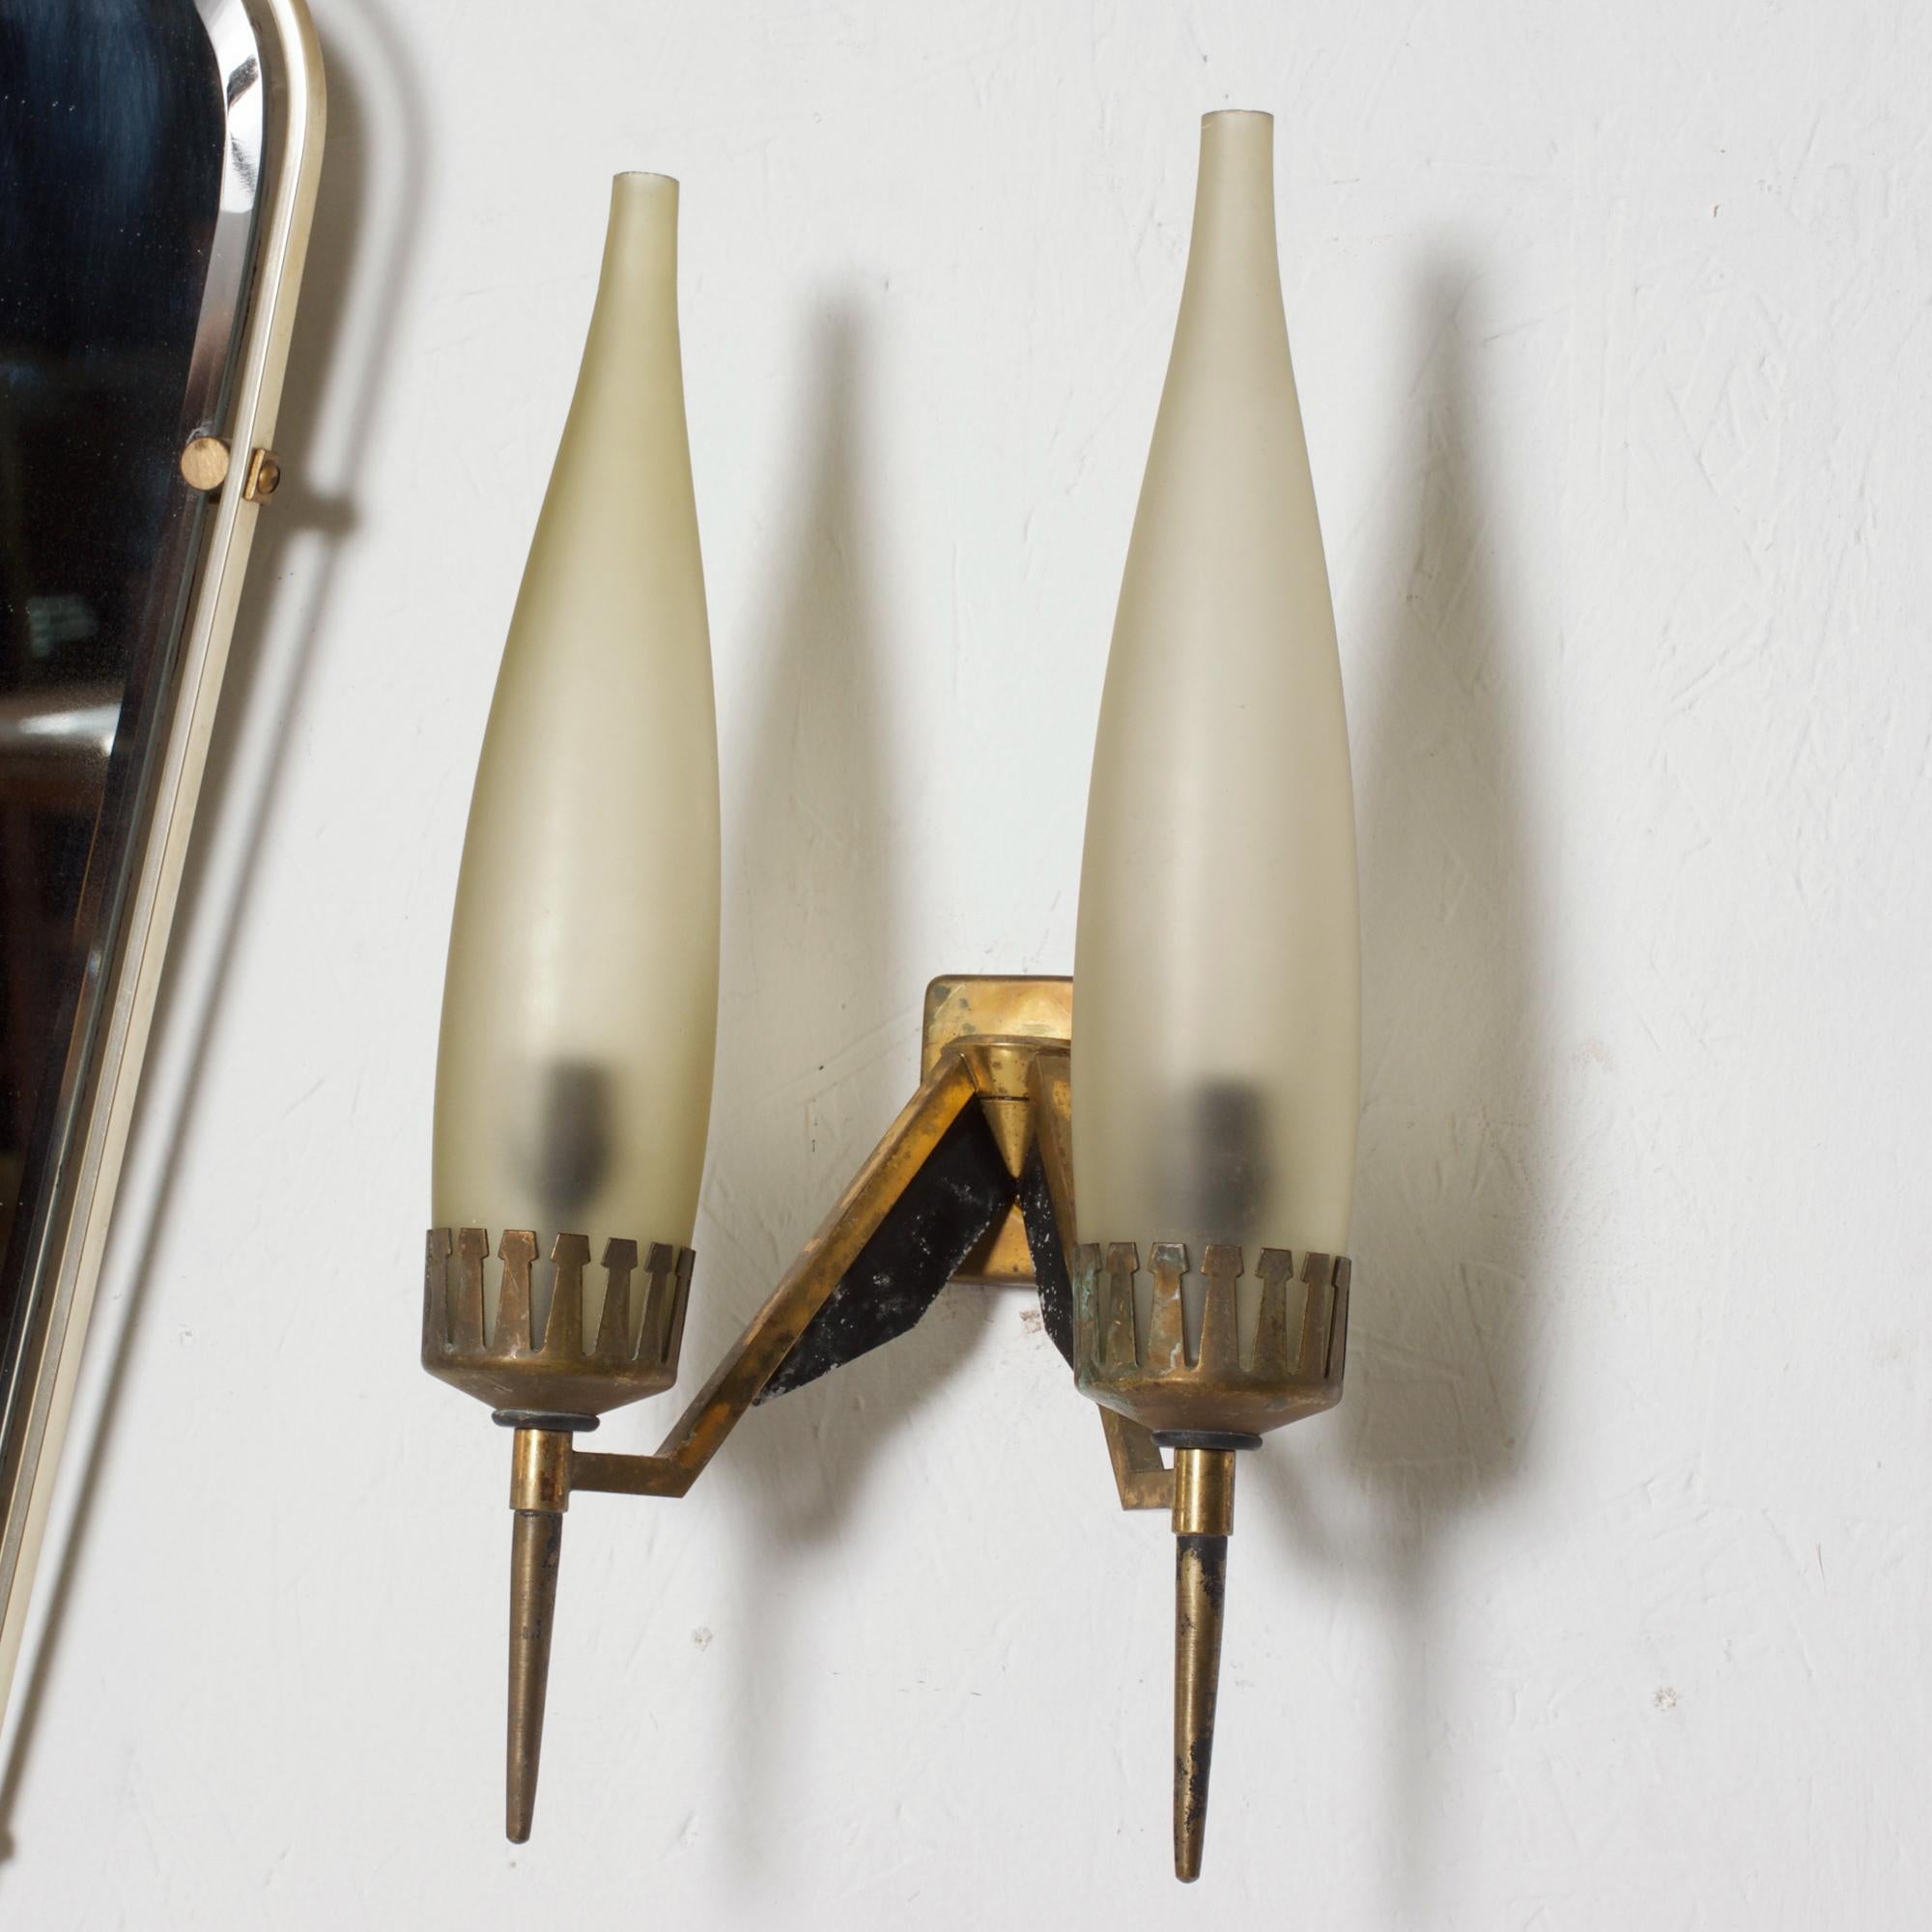 Mid-20th Century 1950s Gio Ponti Italy Candelabra Wall Sconce Pair Brass Crown Tapered Glass